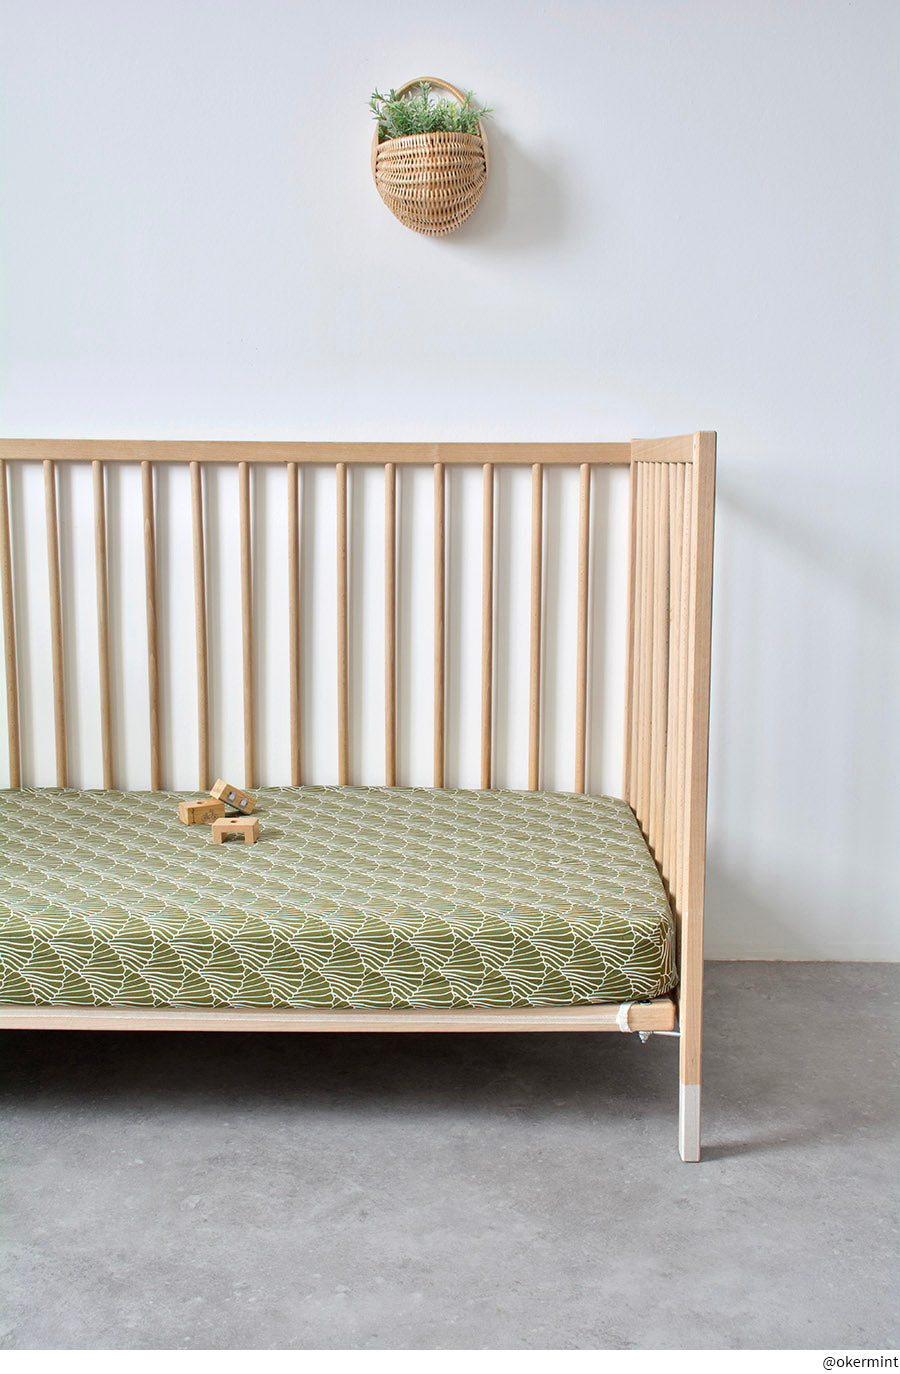 Solid wood cot bed 60x120cm made in Spain